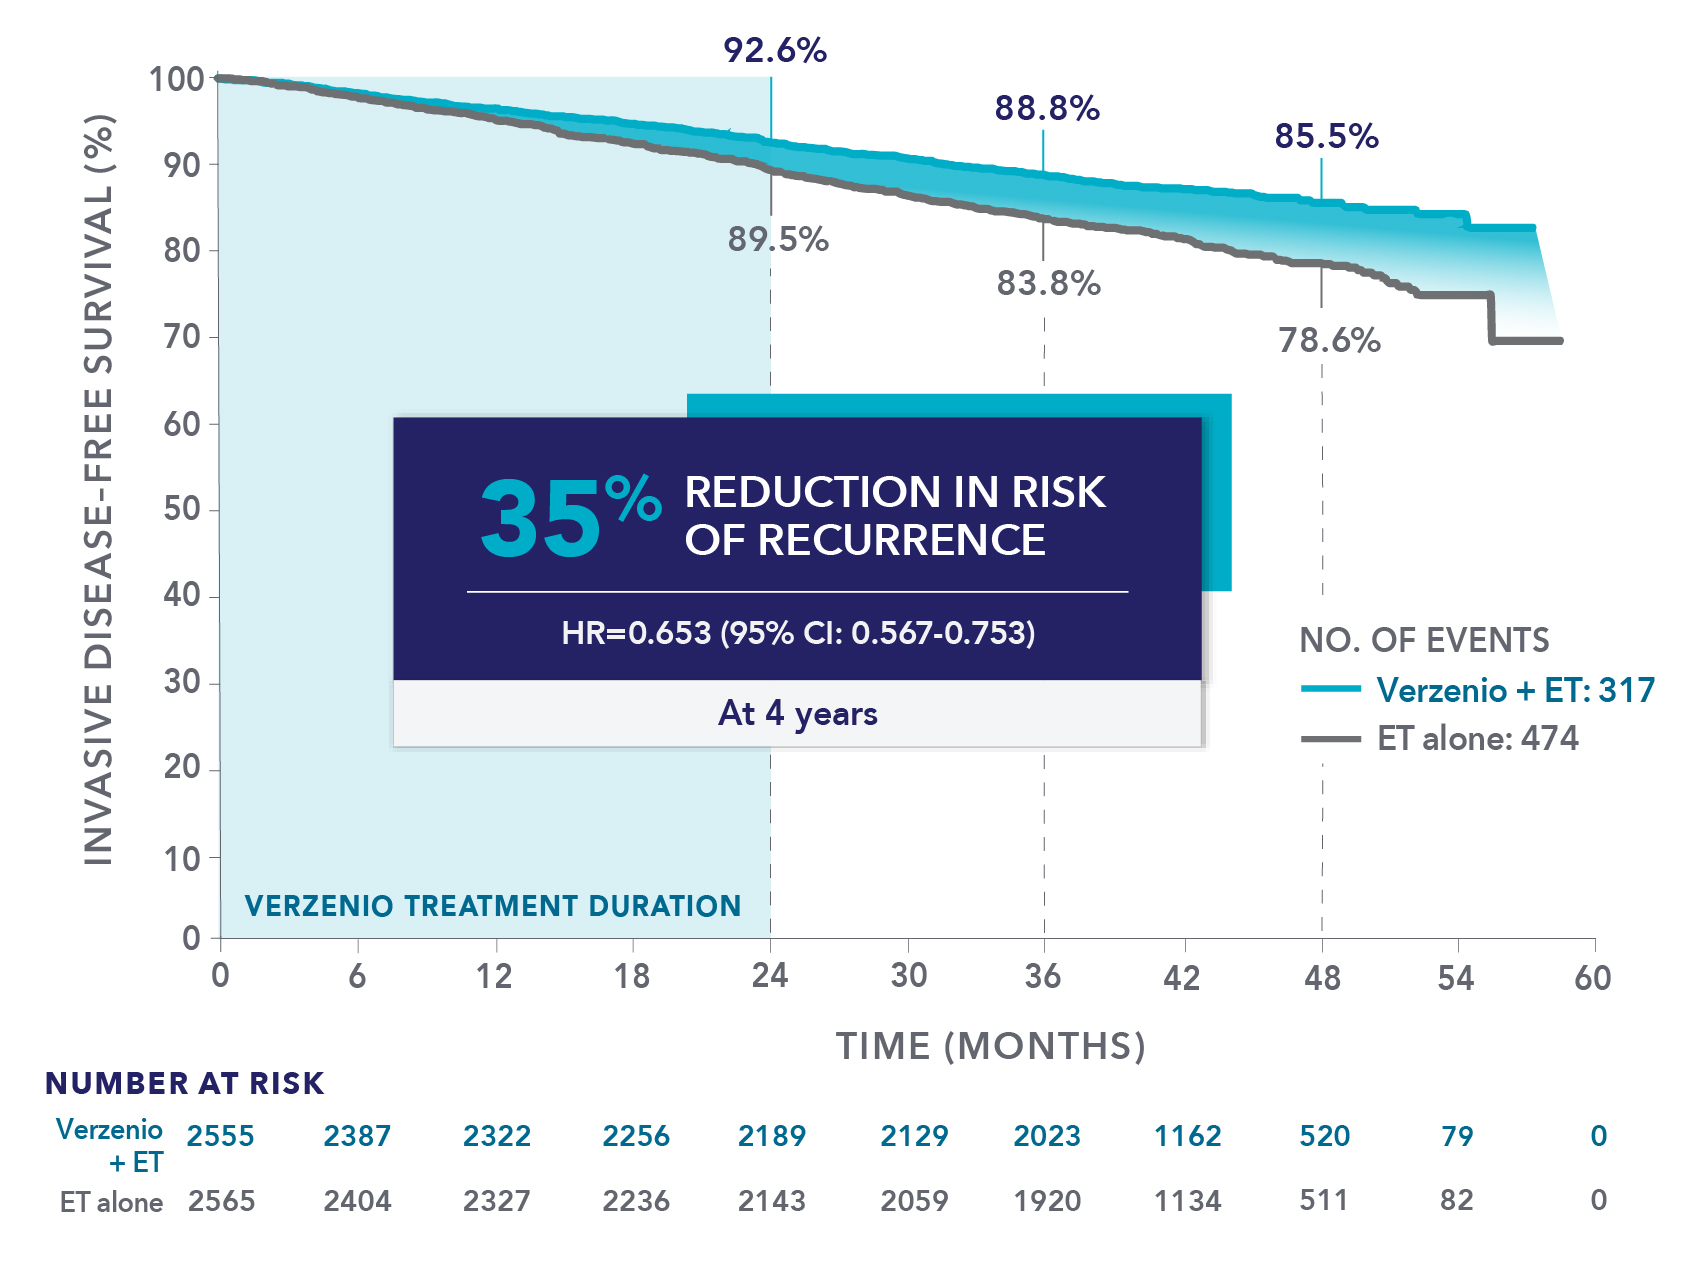 Verzenio reduced the risk of recurrence by 35%